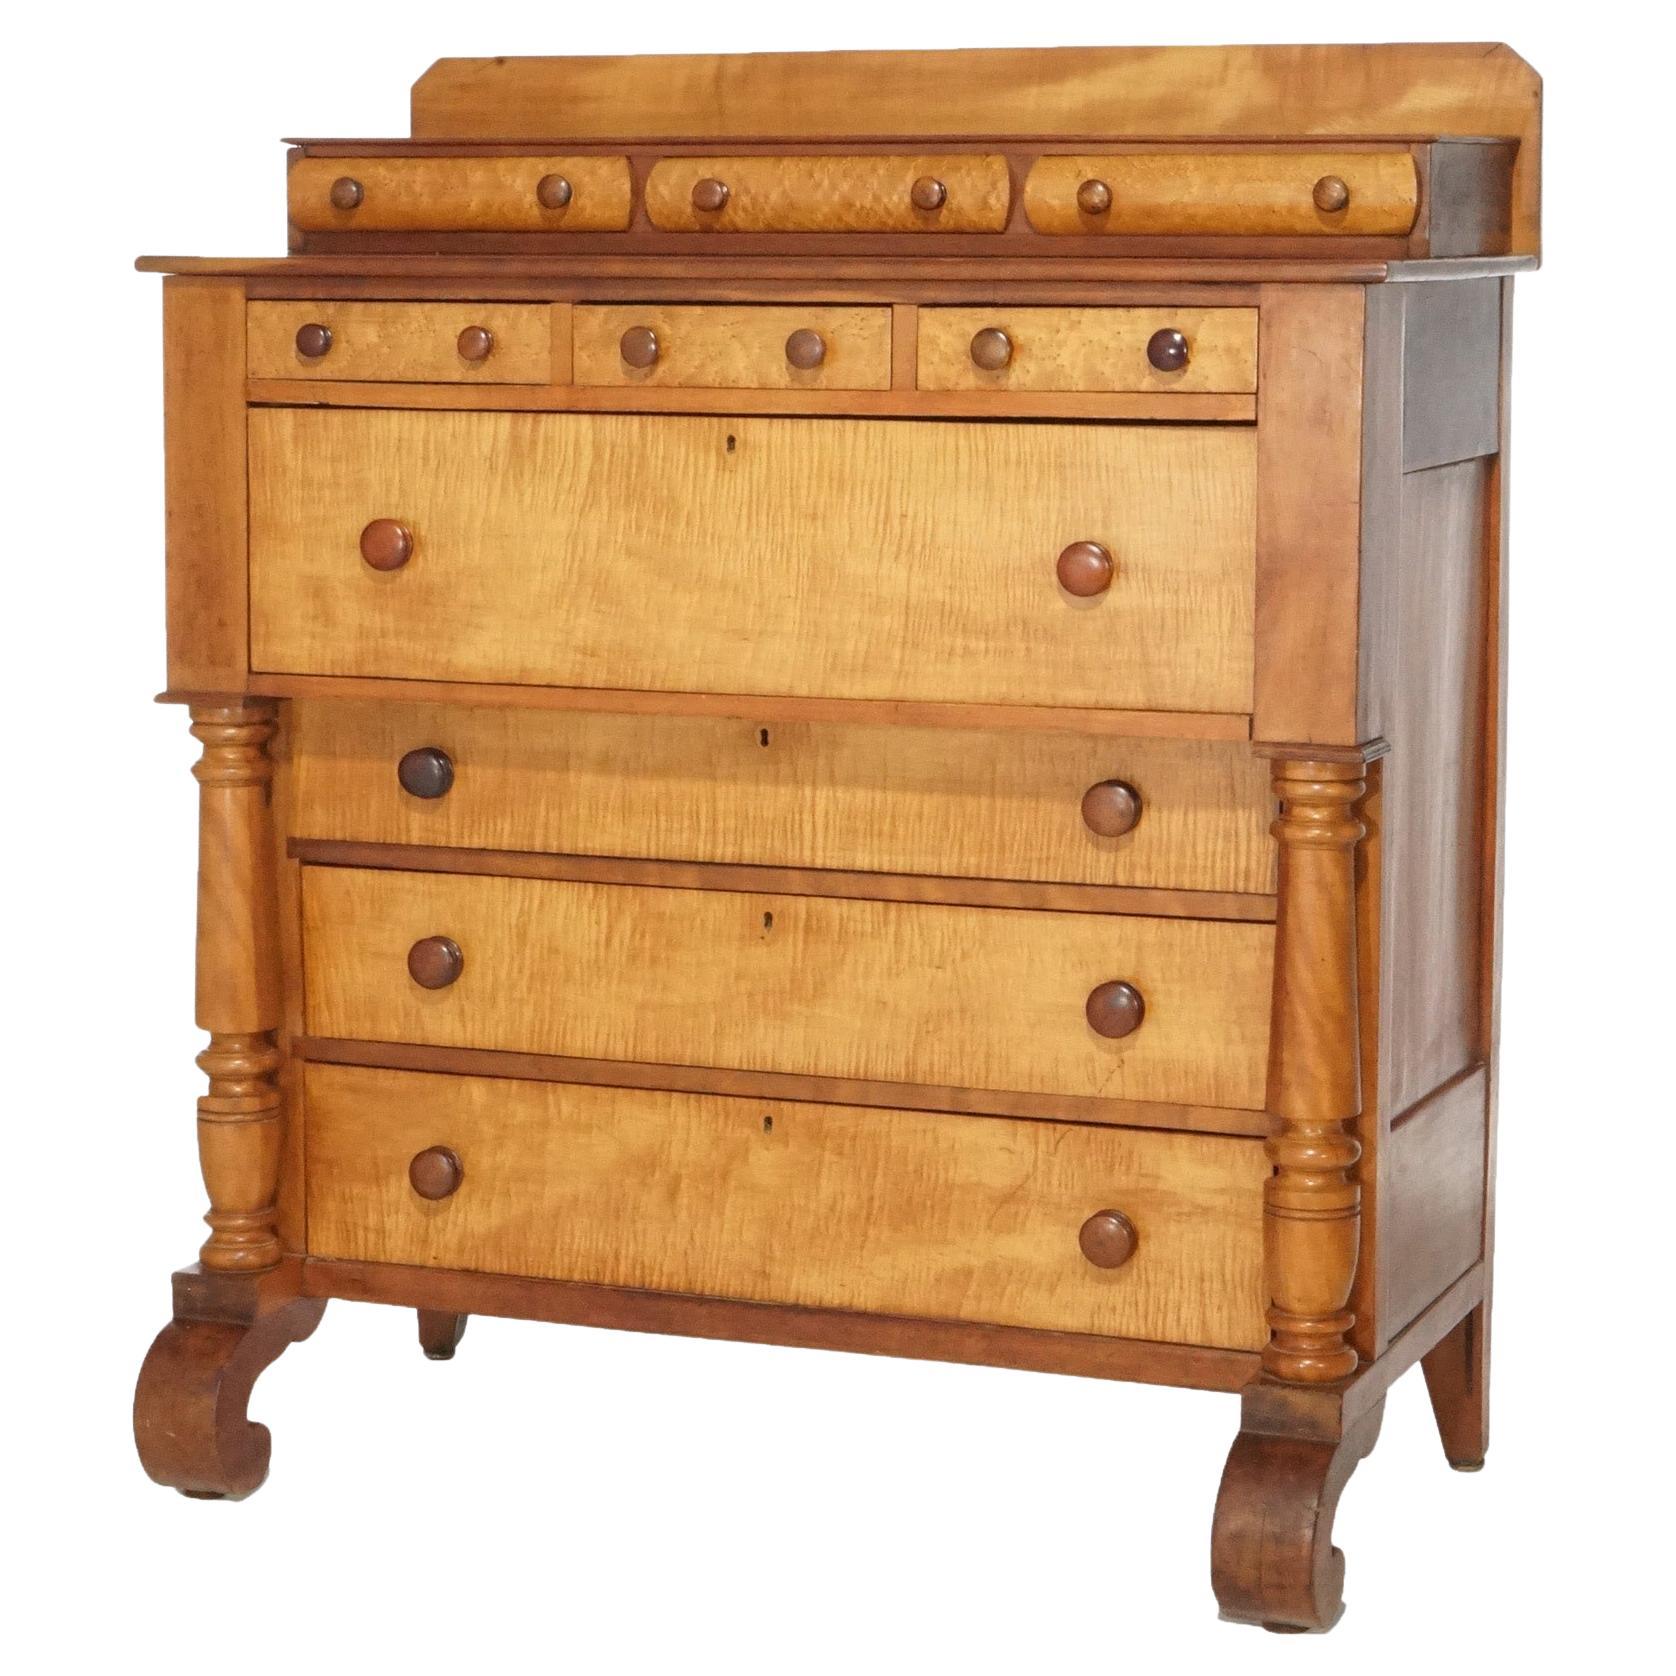 Antique American Empire Tiger Maple & Cherry Chest of Drawers, circa 1840